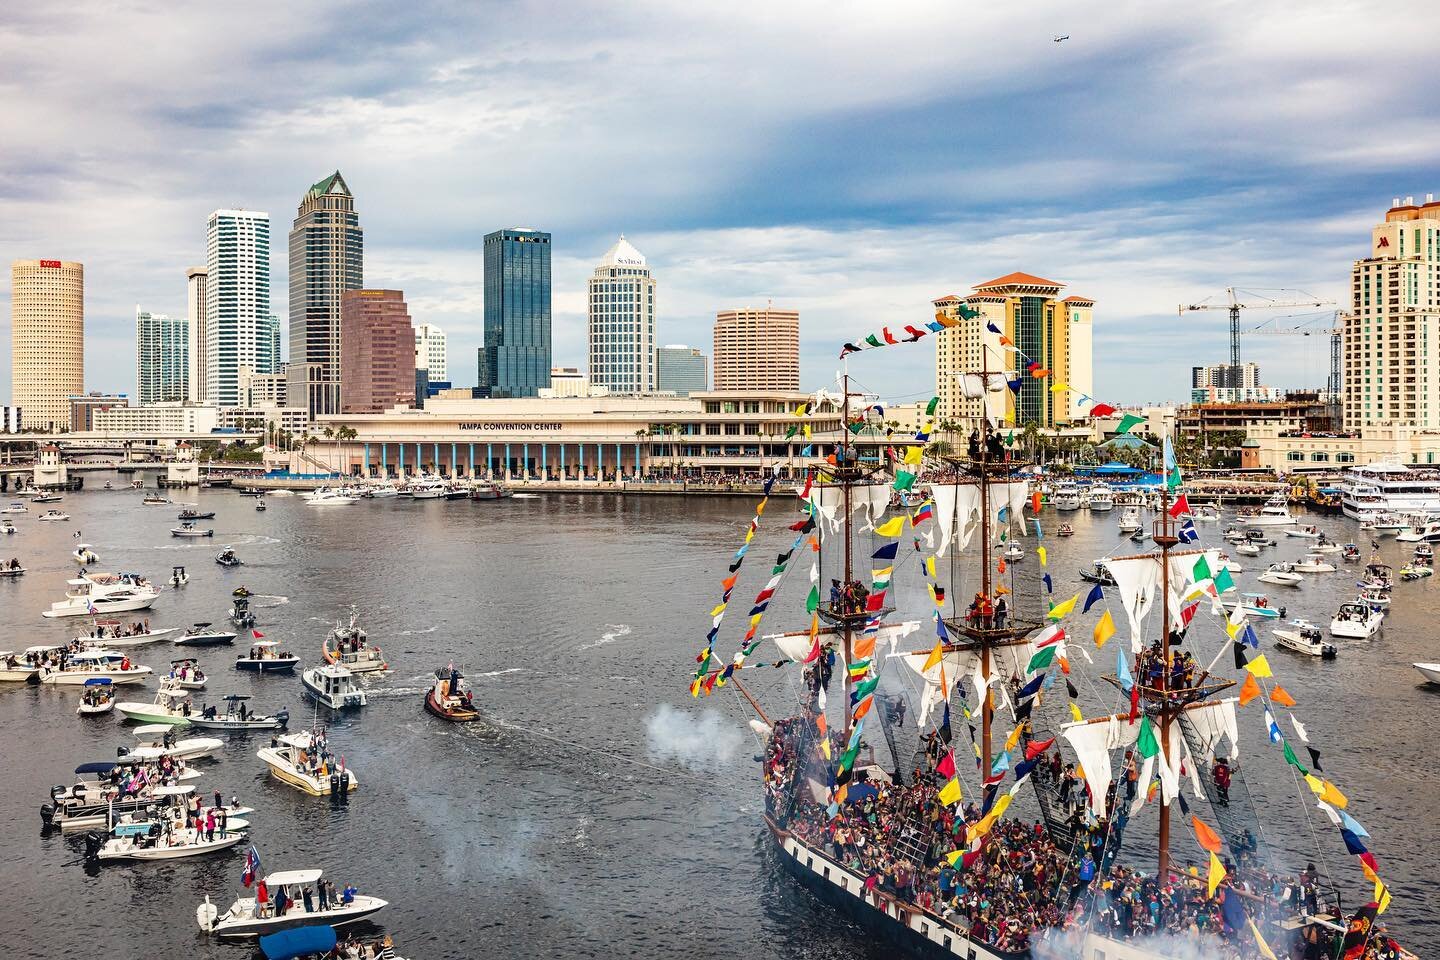 #tbt @cityoftampa Missin us some Gasparilla!  We hope everyone has a great/ safe weekend ahead! 
.
.
.
.
.
.
#gasparilla #piratelife #gasparillainvasion #gasparillatampa #tampabay #downtowntampa #downtown #florida #floridaphotographer #saltlife #city